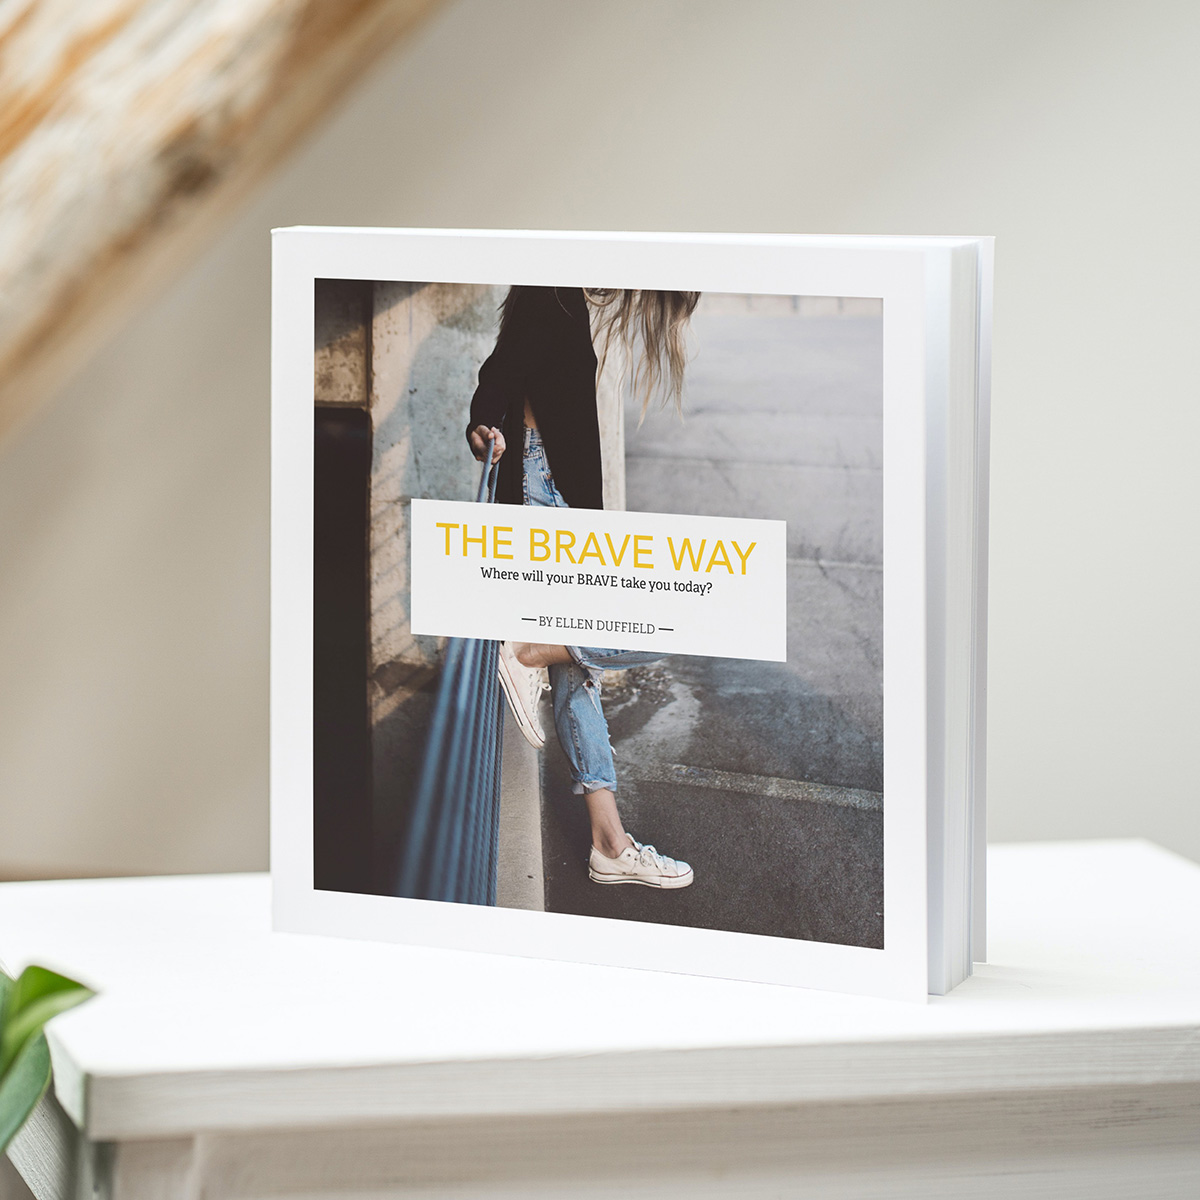 The BRAVE Way: Where will your BRAVE take you